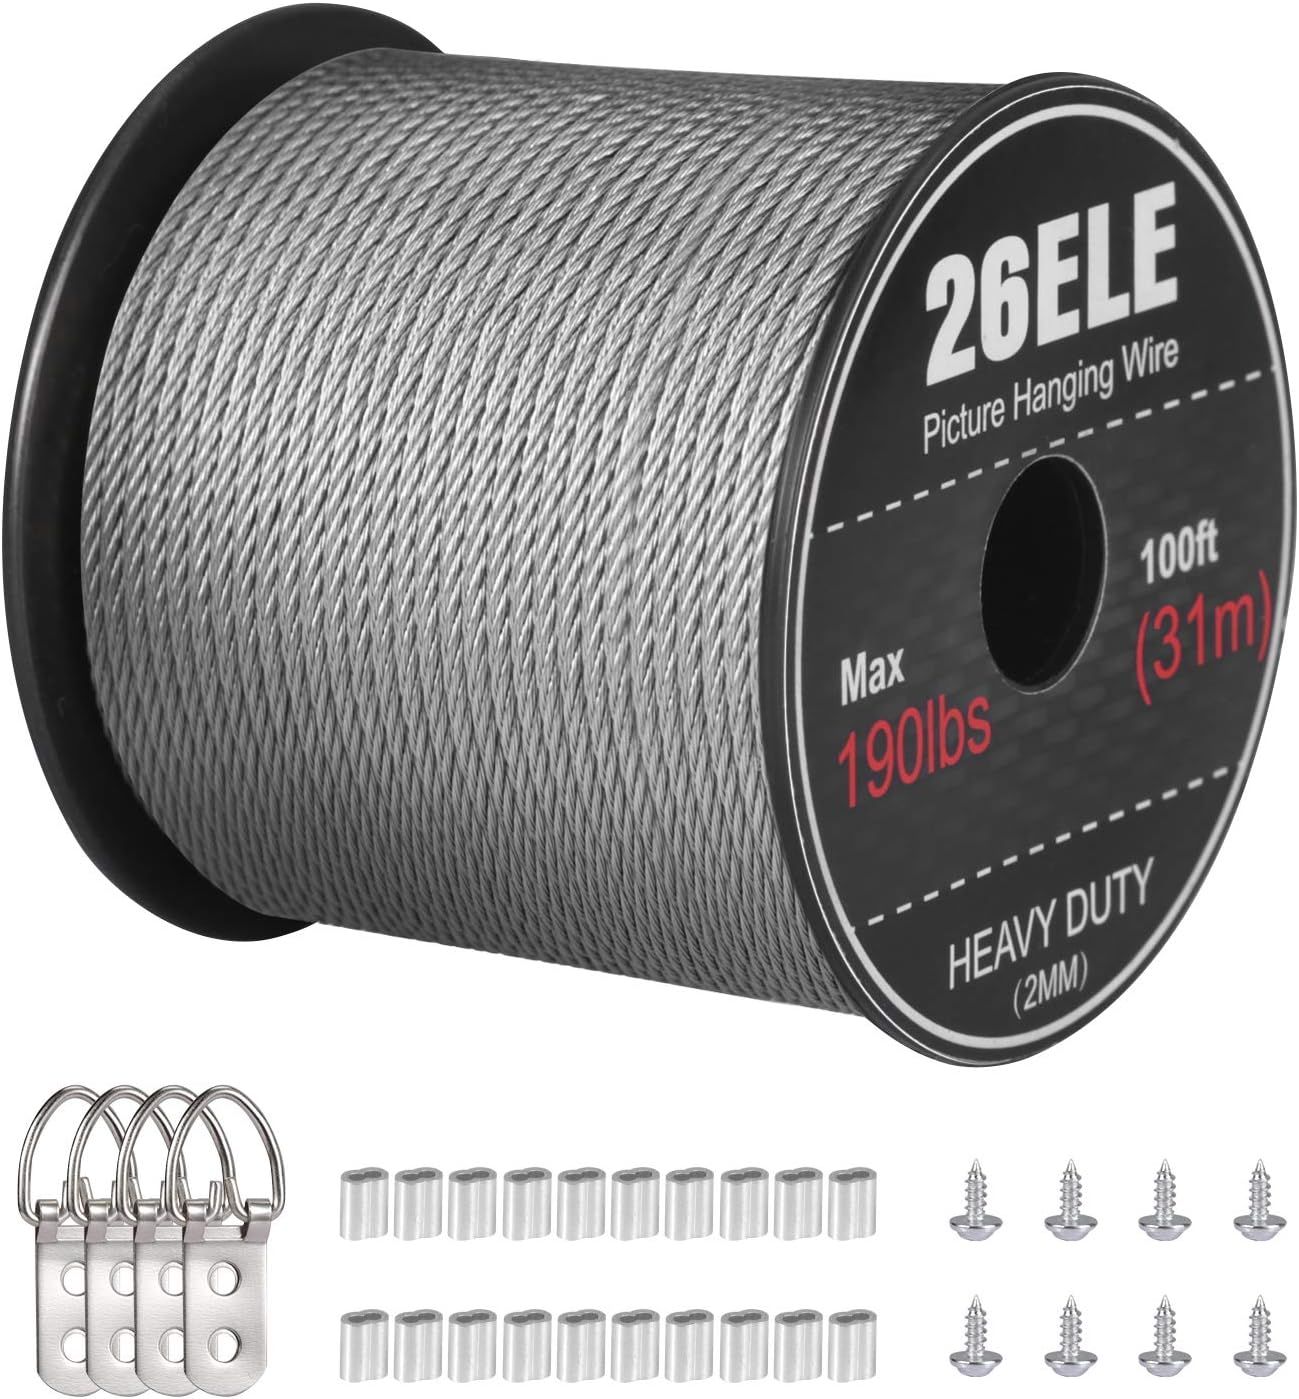 26ele Picture Hanging Wire 190lbs, Heavy Duty | Ubuy France Within Newest Heavy Duty Wall Art (View 4 of 20)